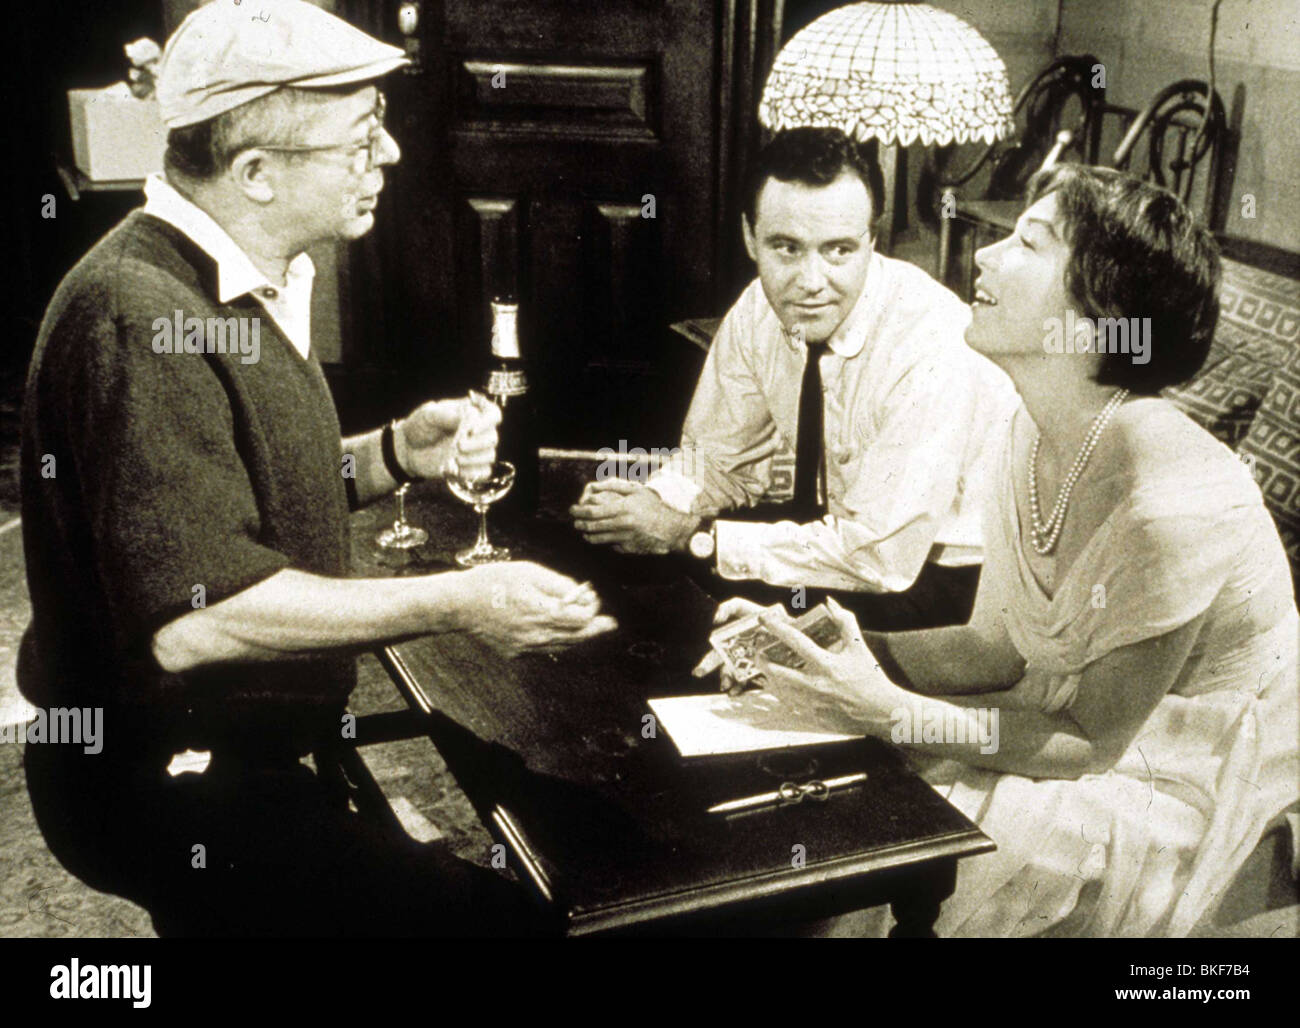 BILLY WILDER (DIR) O/S 'THE APARTMENT' (1960) WITH JACK LEMMON